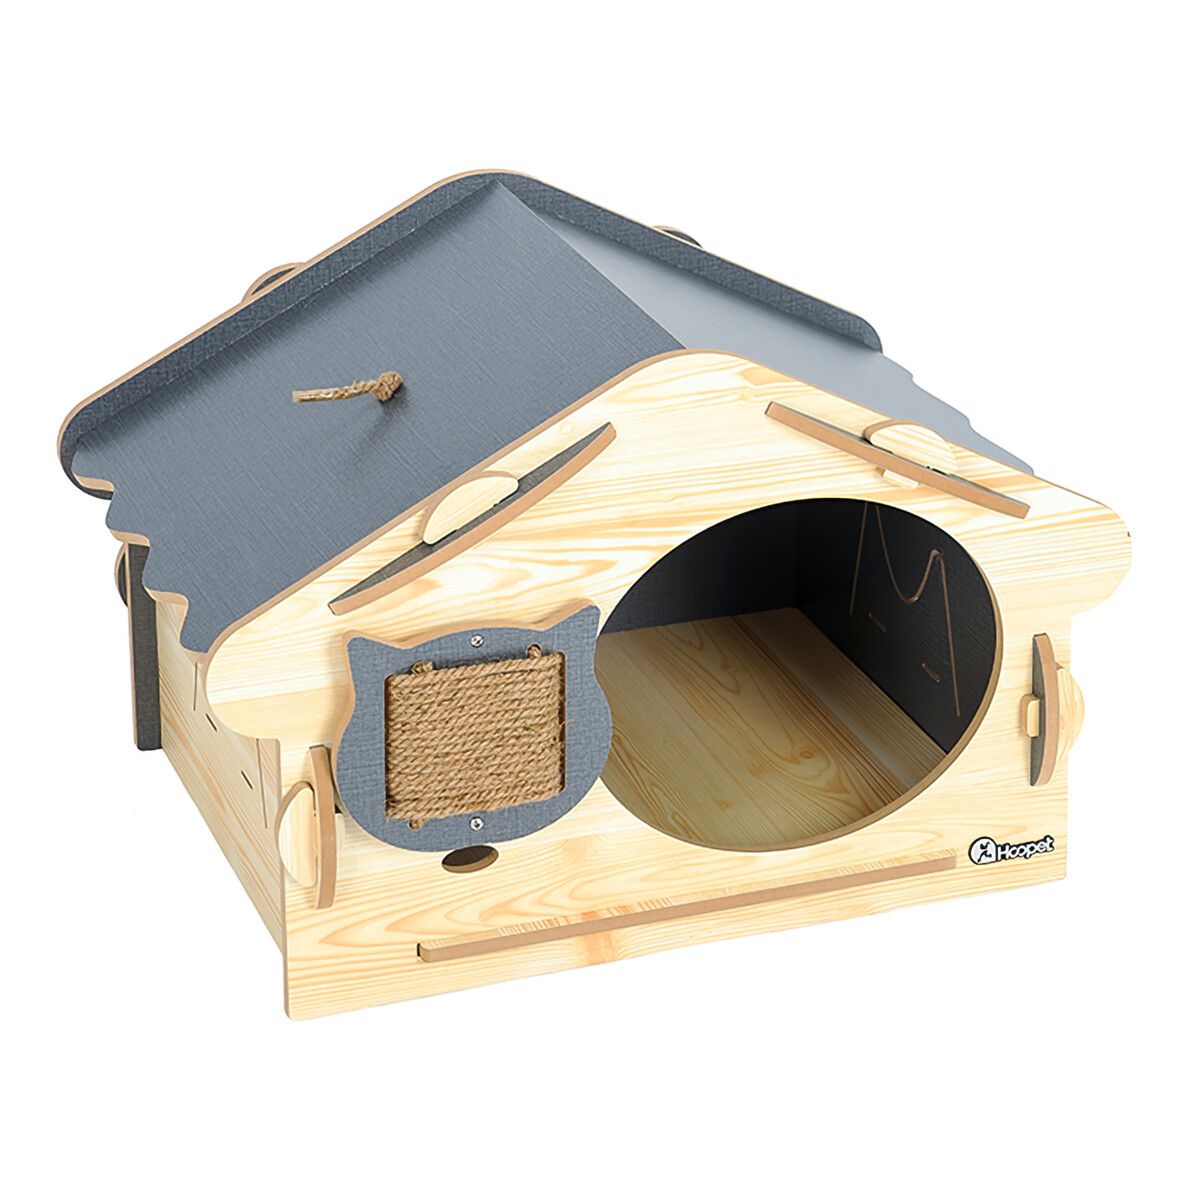 Large Wooden Cat House